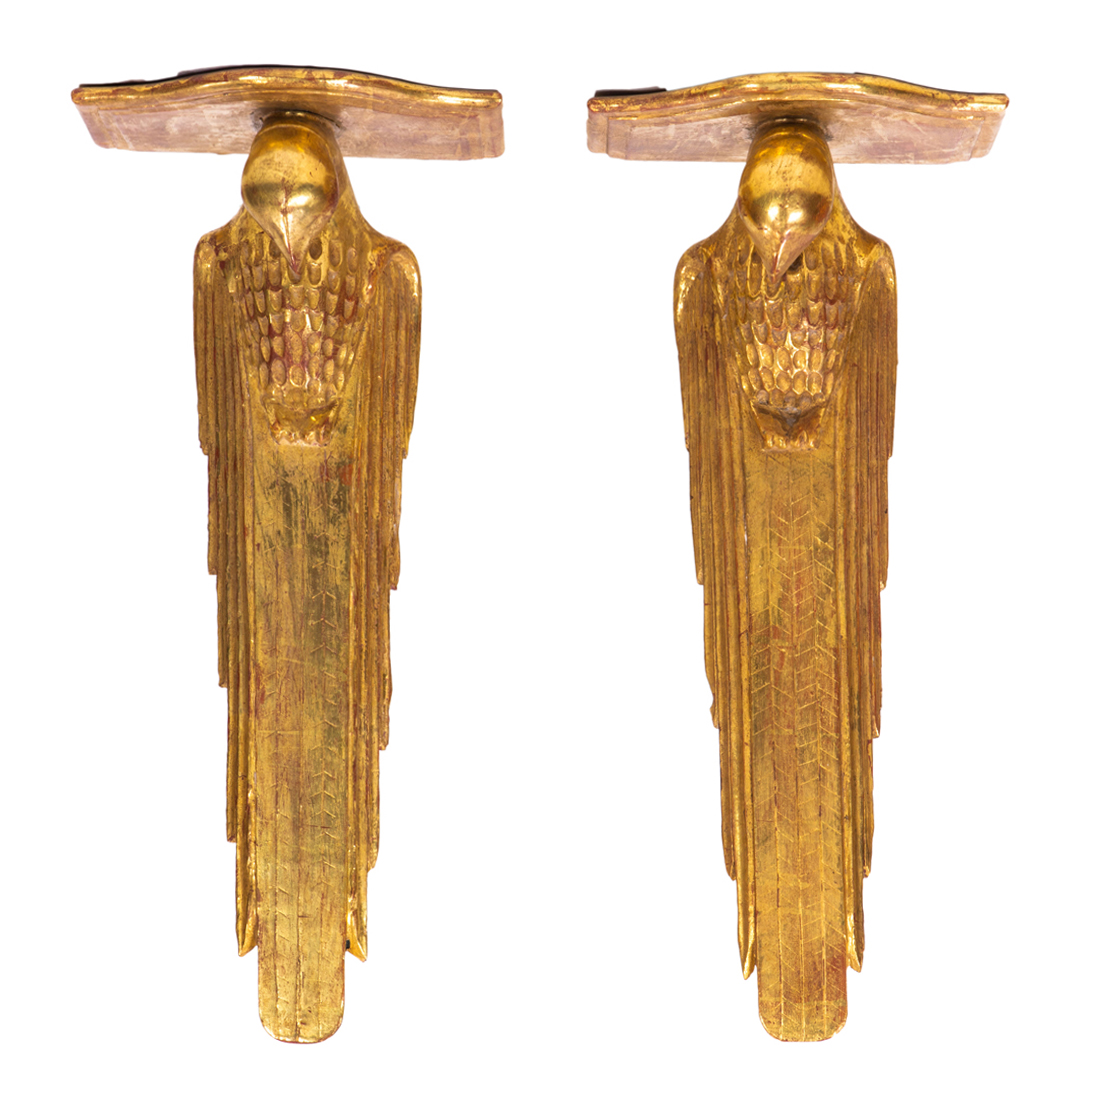 A PAIR OF ART DECO STYLE GILTWOOD